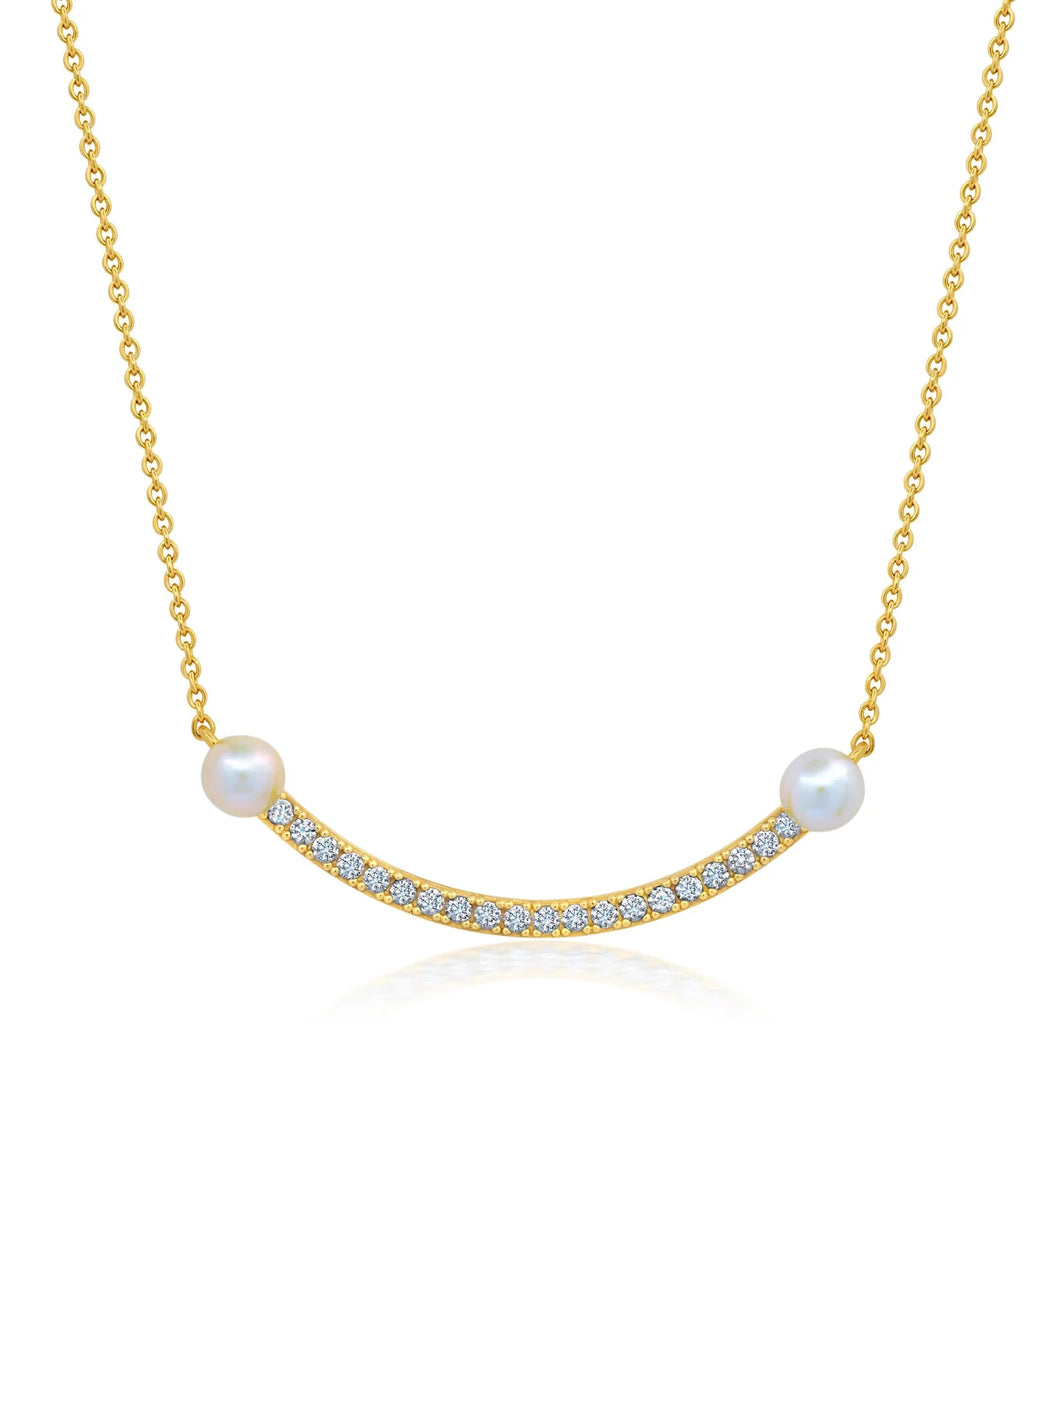 Pave Bar With Pearls 16'' Extending Necklace Finished in 18kt Yellow Gold